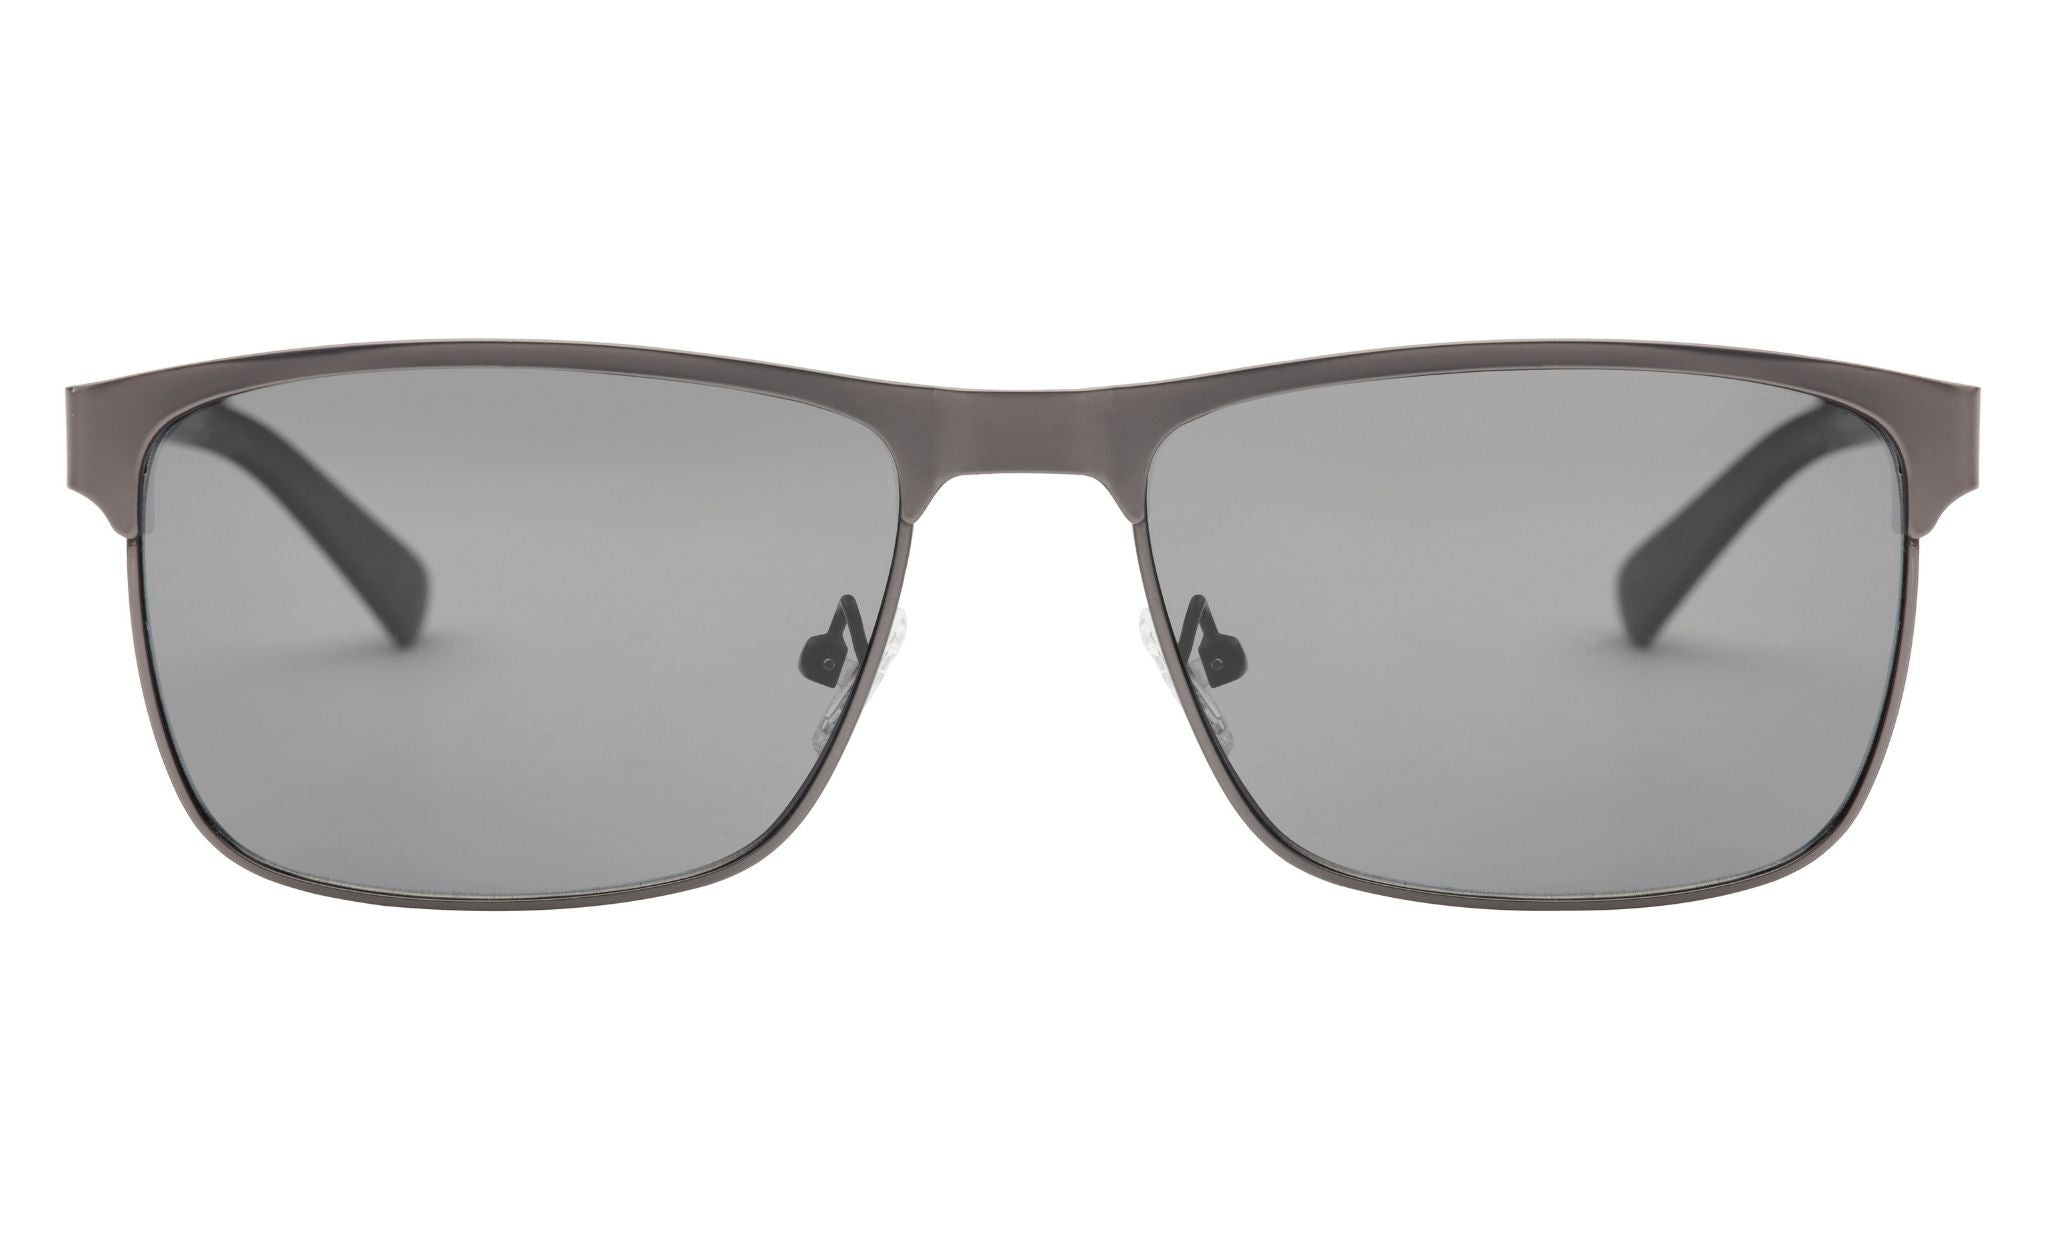 Foster Grant Mens Way Black Sunglasses DroneUp Delivery, 58% OFF